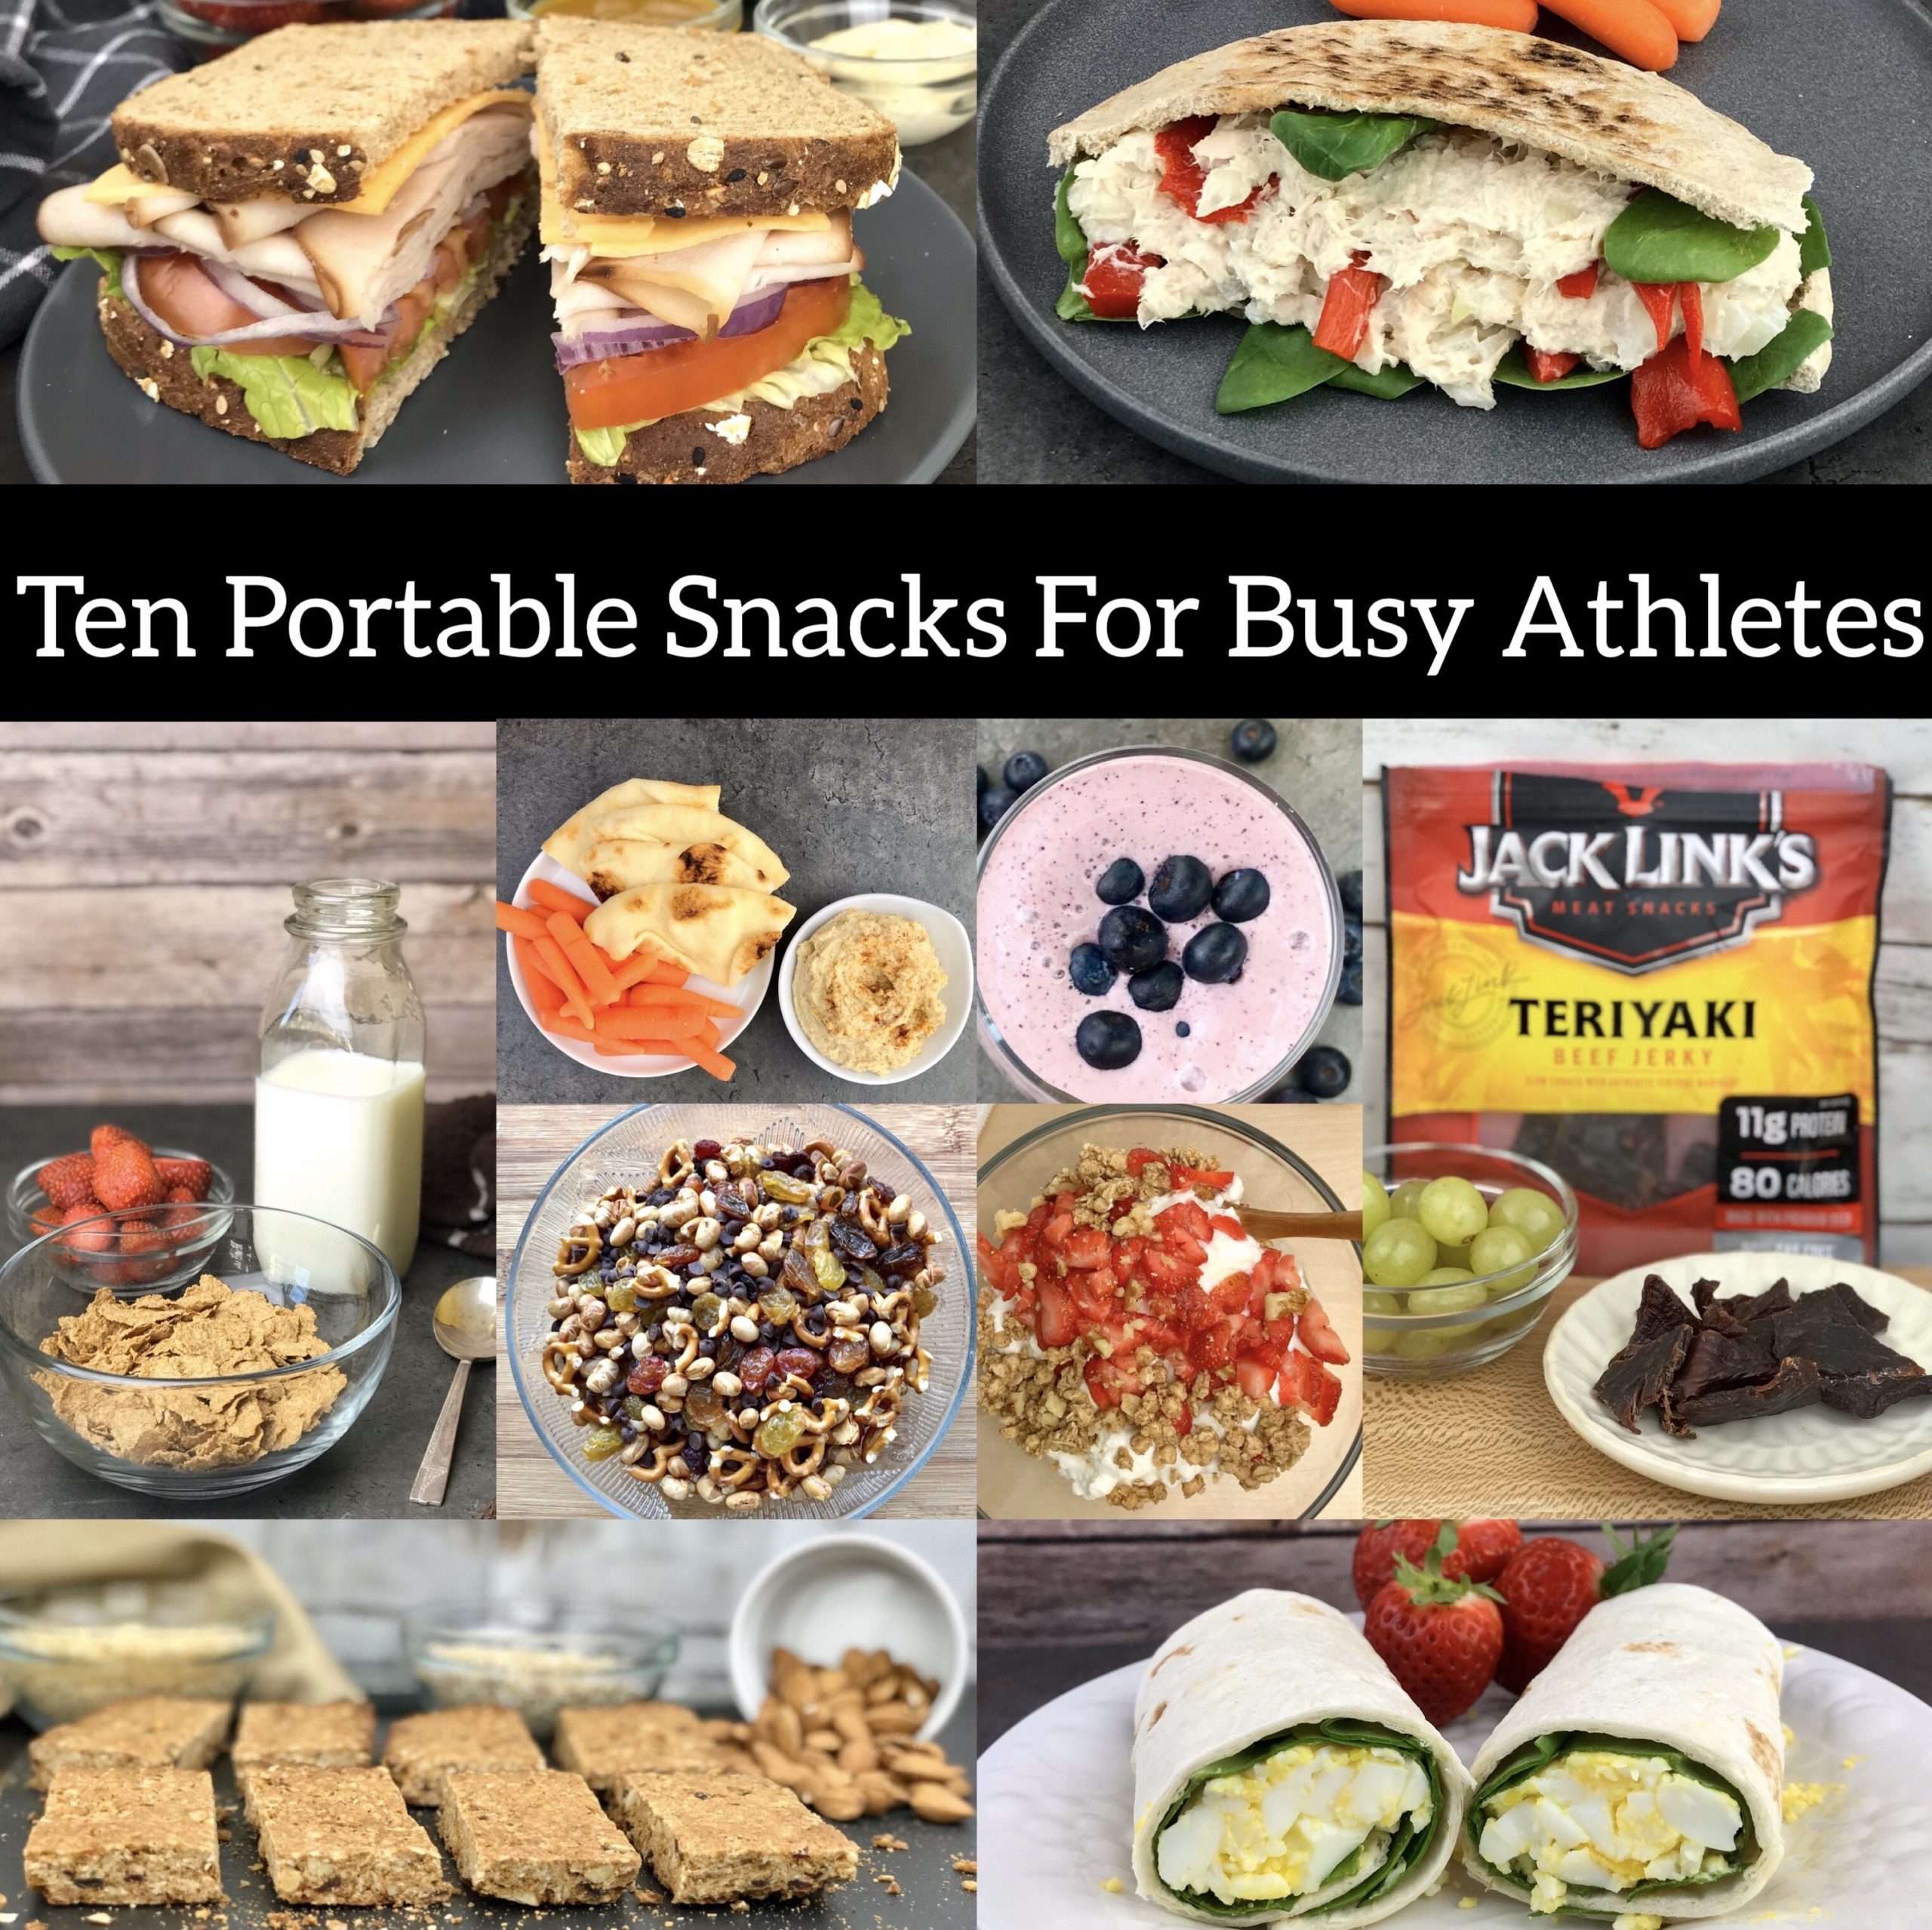 Athlete-approved snacks